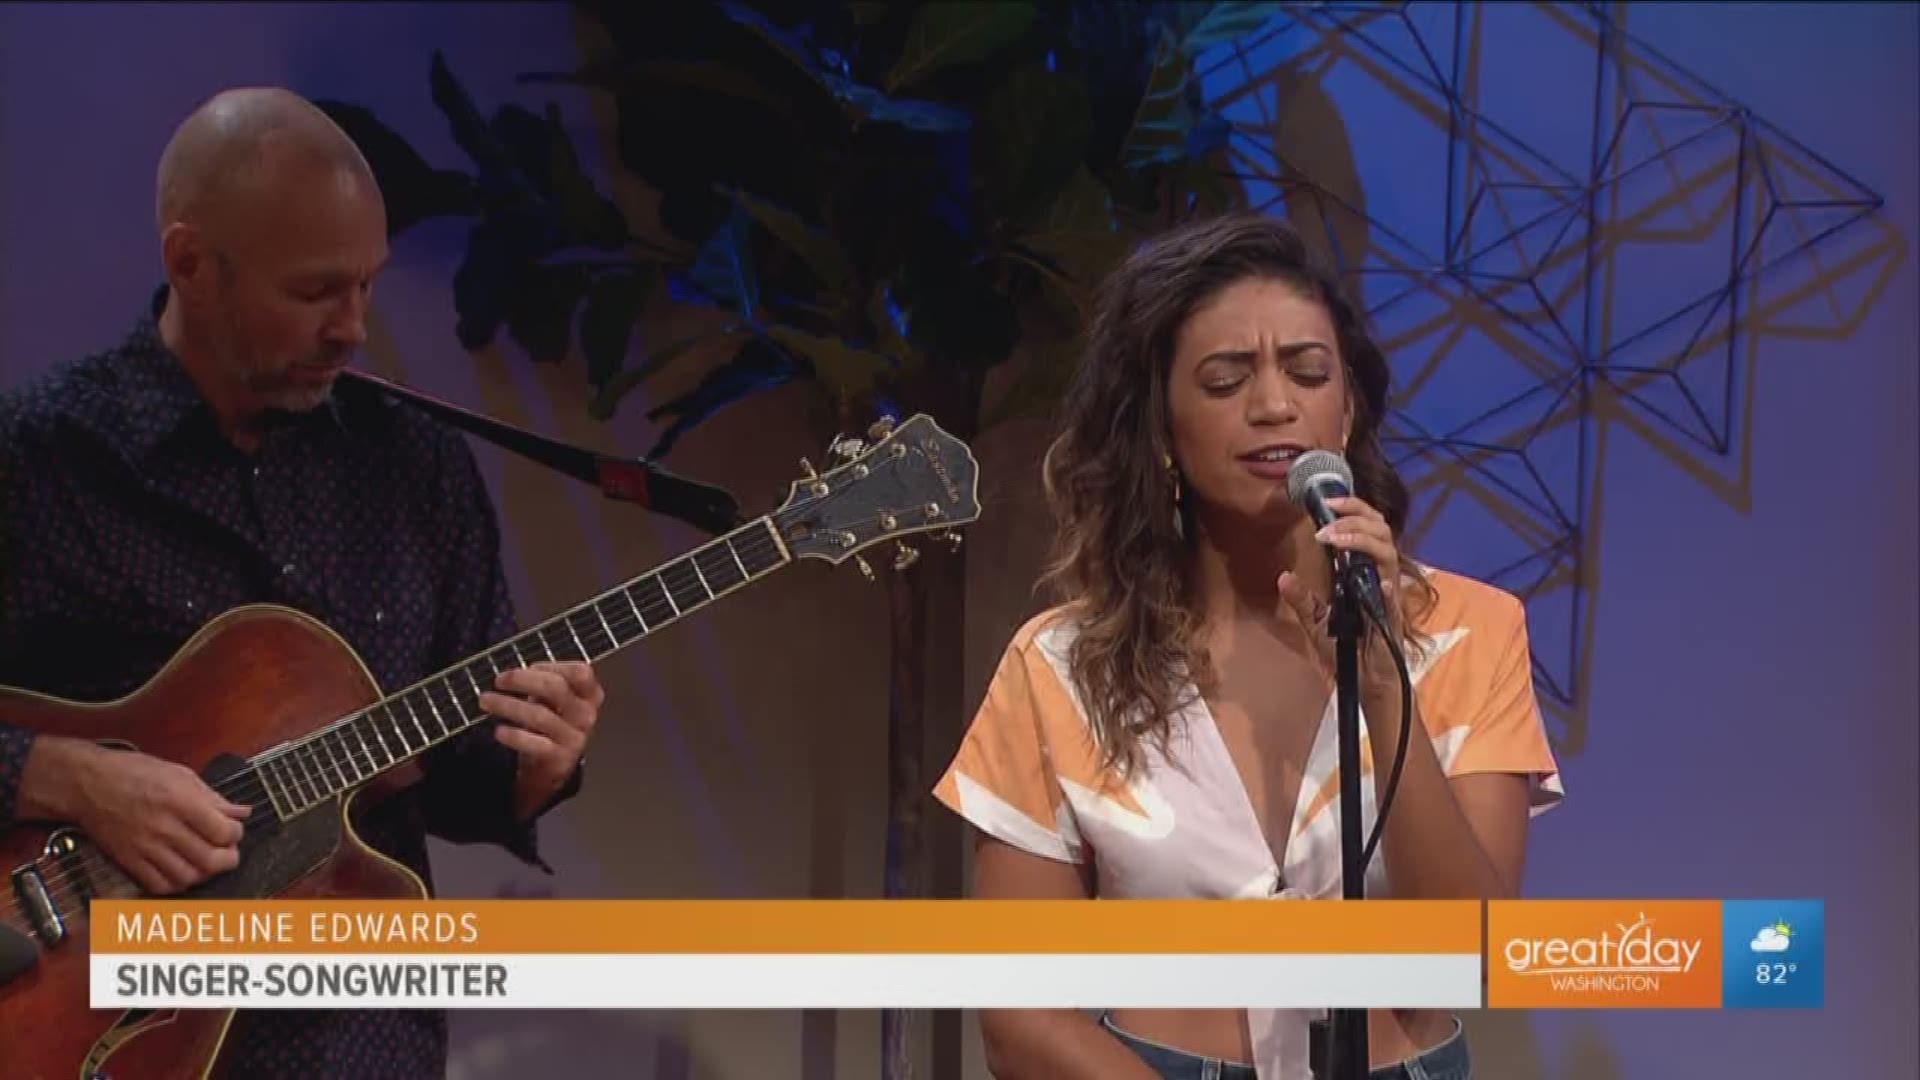 Singer-songwriter Madeline Edwards focuses on music of hope and healing. She performs "Trying to Make Sense" live on Great Day Washington and is set to release her first full album this fall.